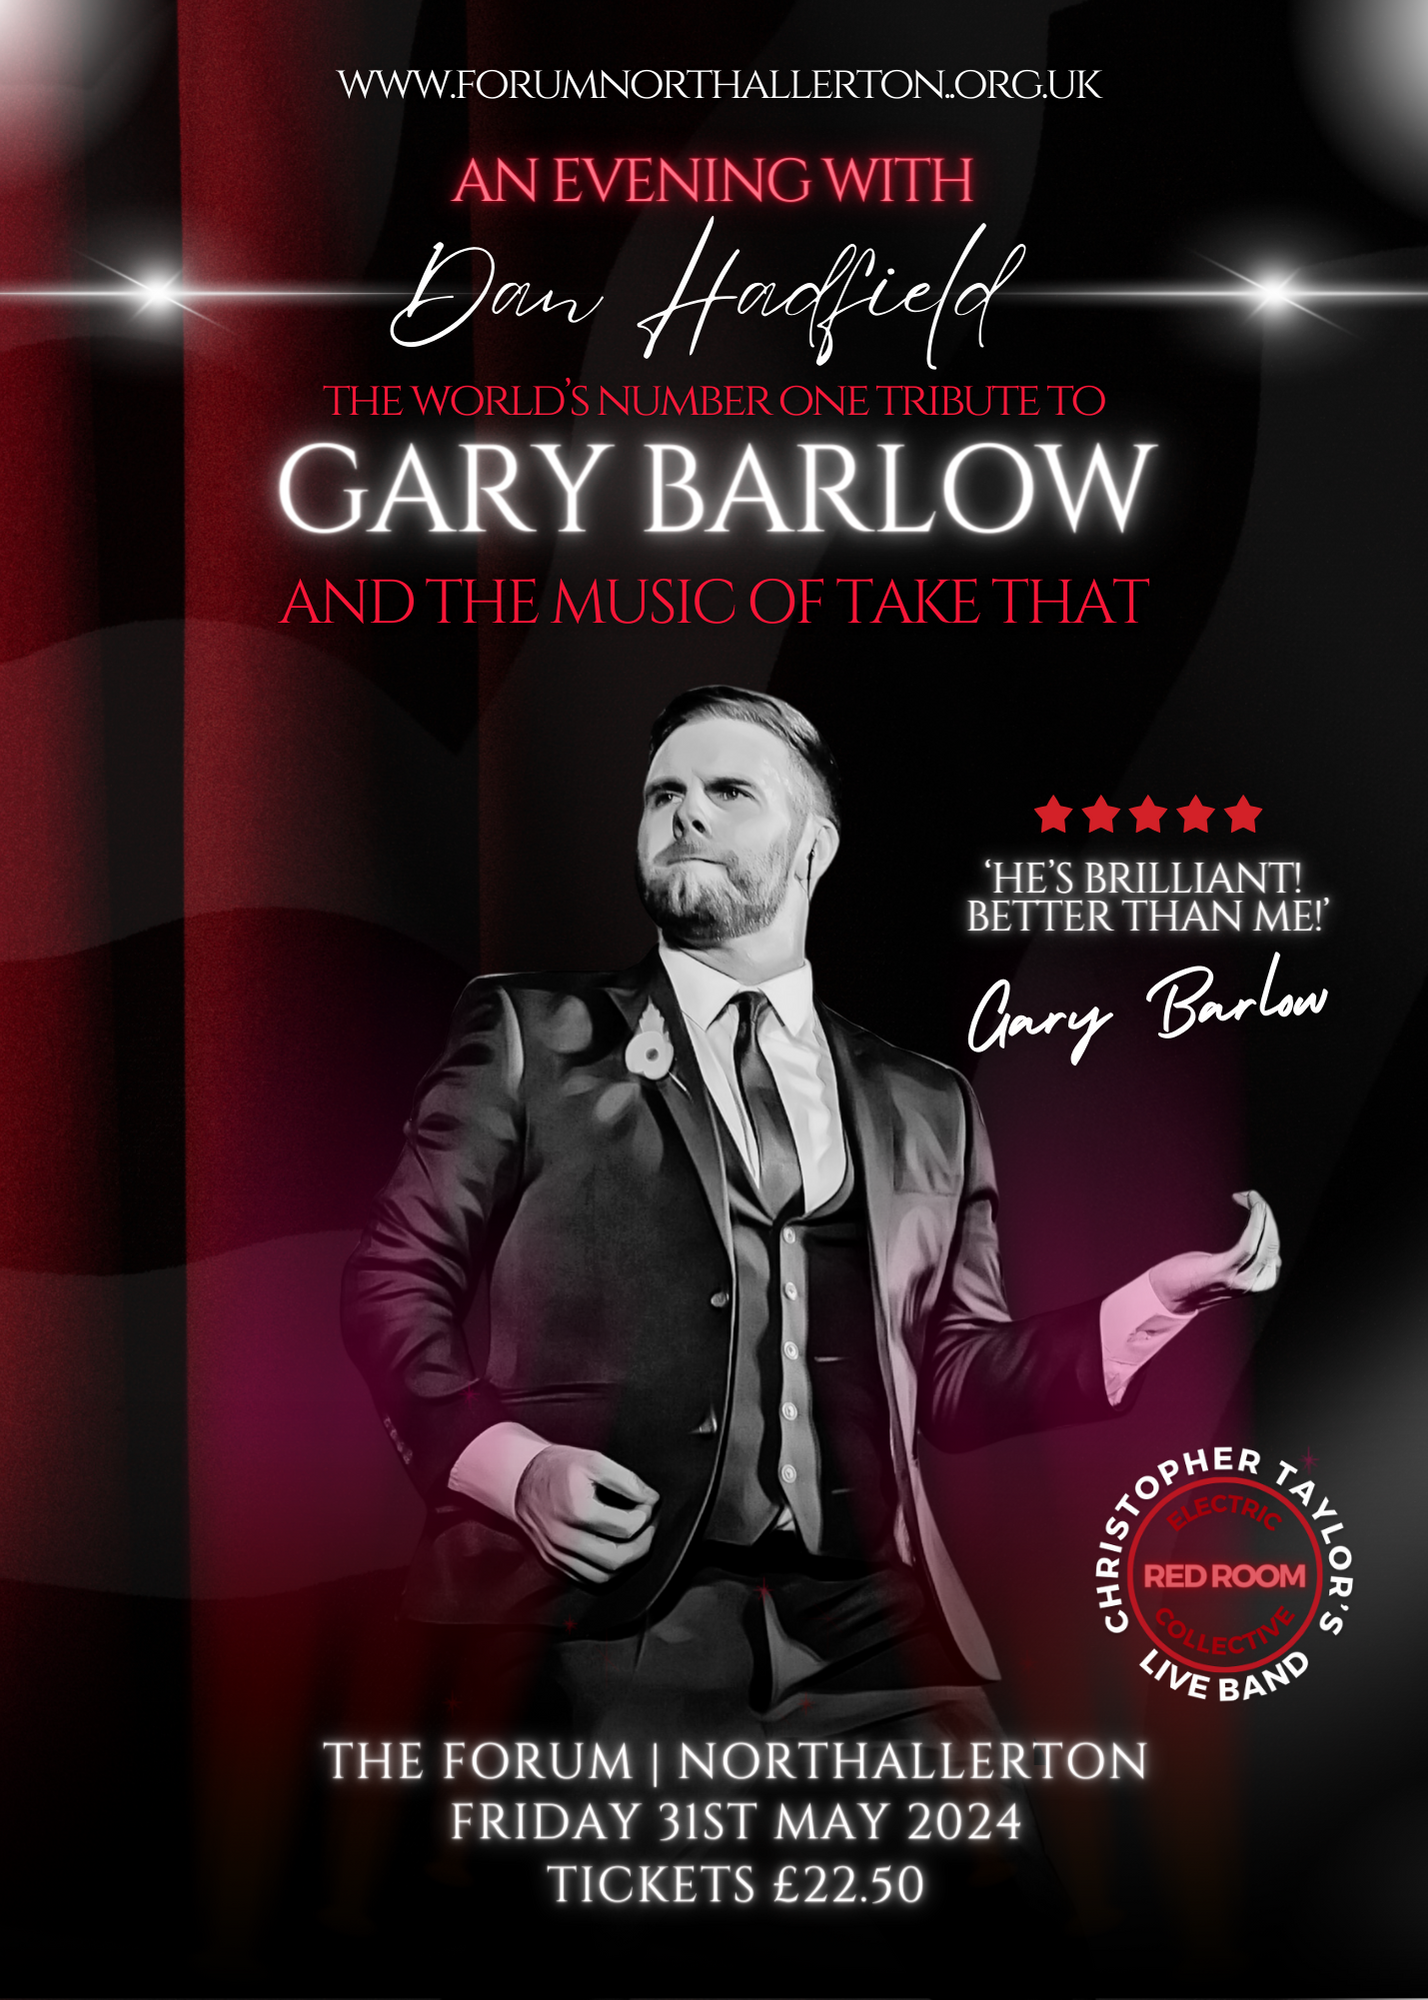 AN EVENING WITH DAN HADFIELD AS GARY BARLOW & THE MUSIC OF TAKE THAT